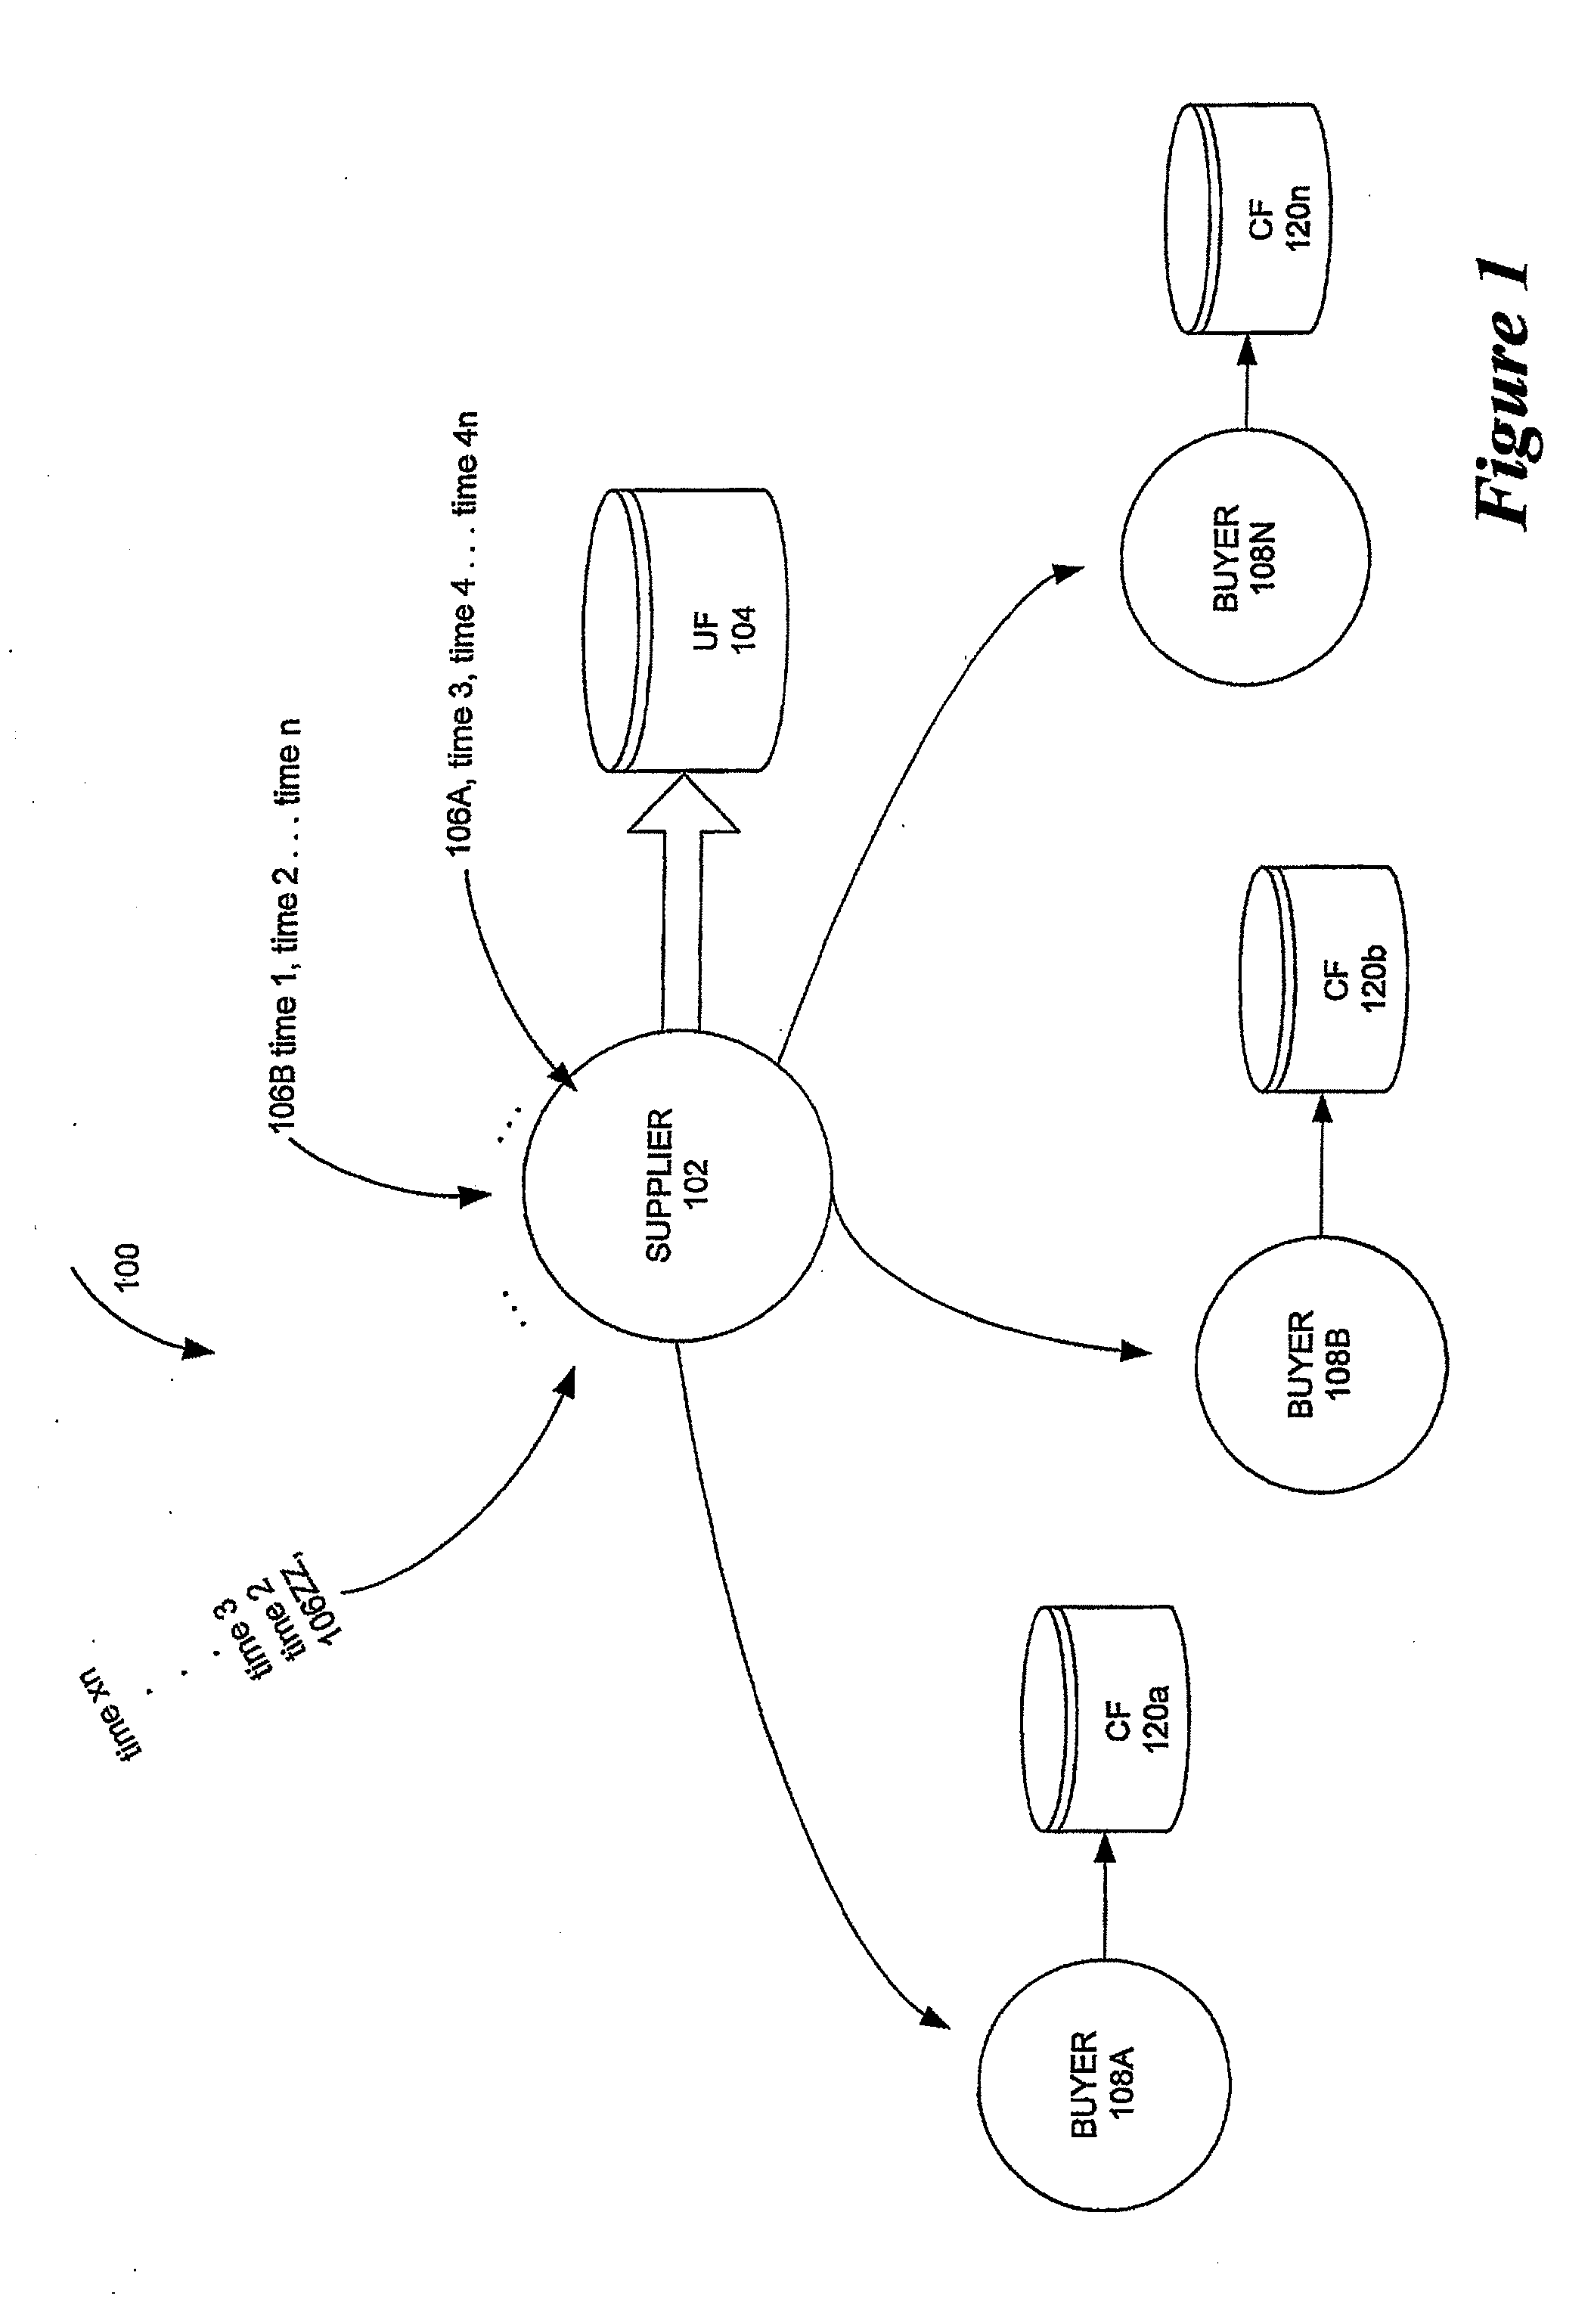 System and method for managing and updating information relating to economic entities